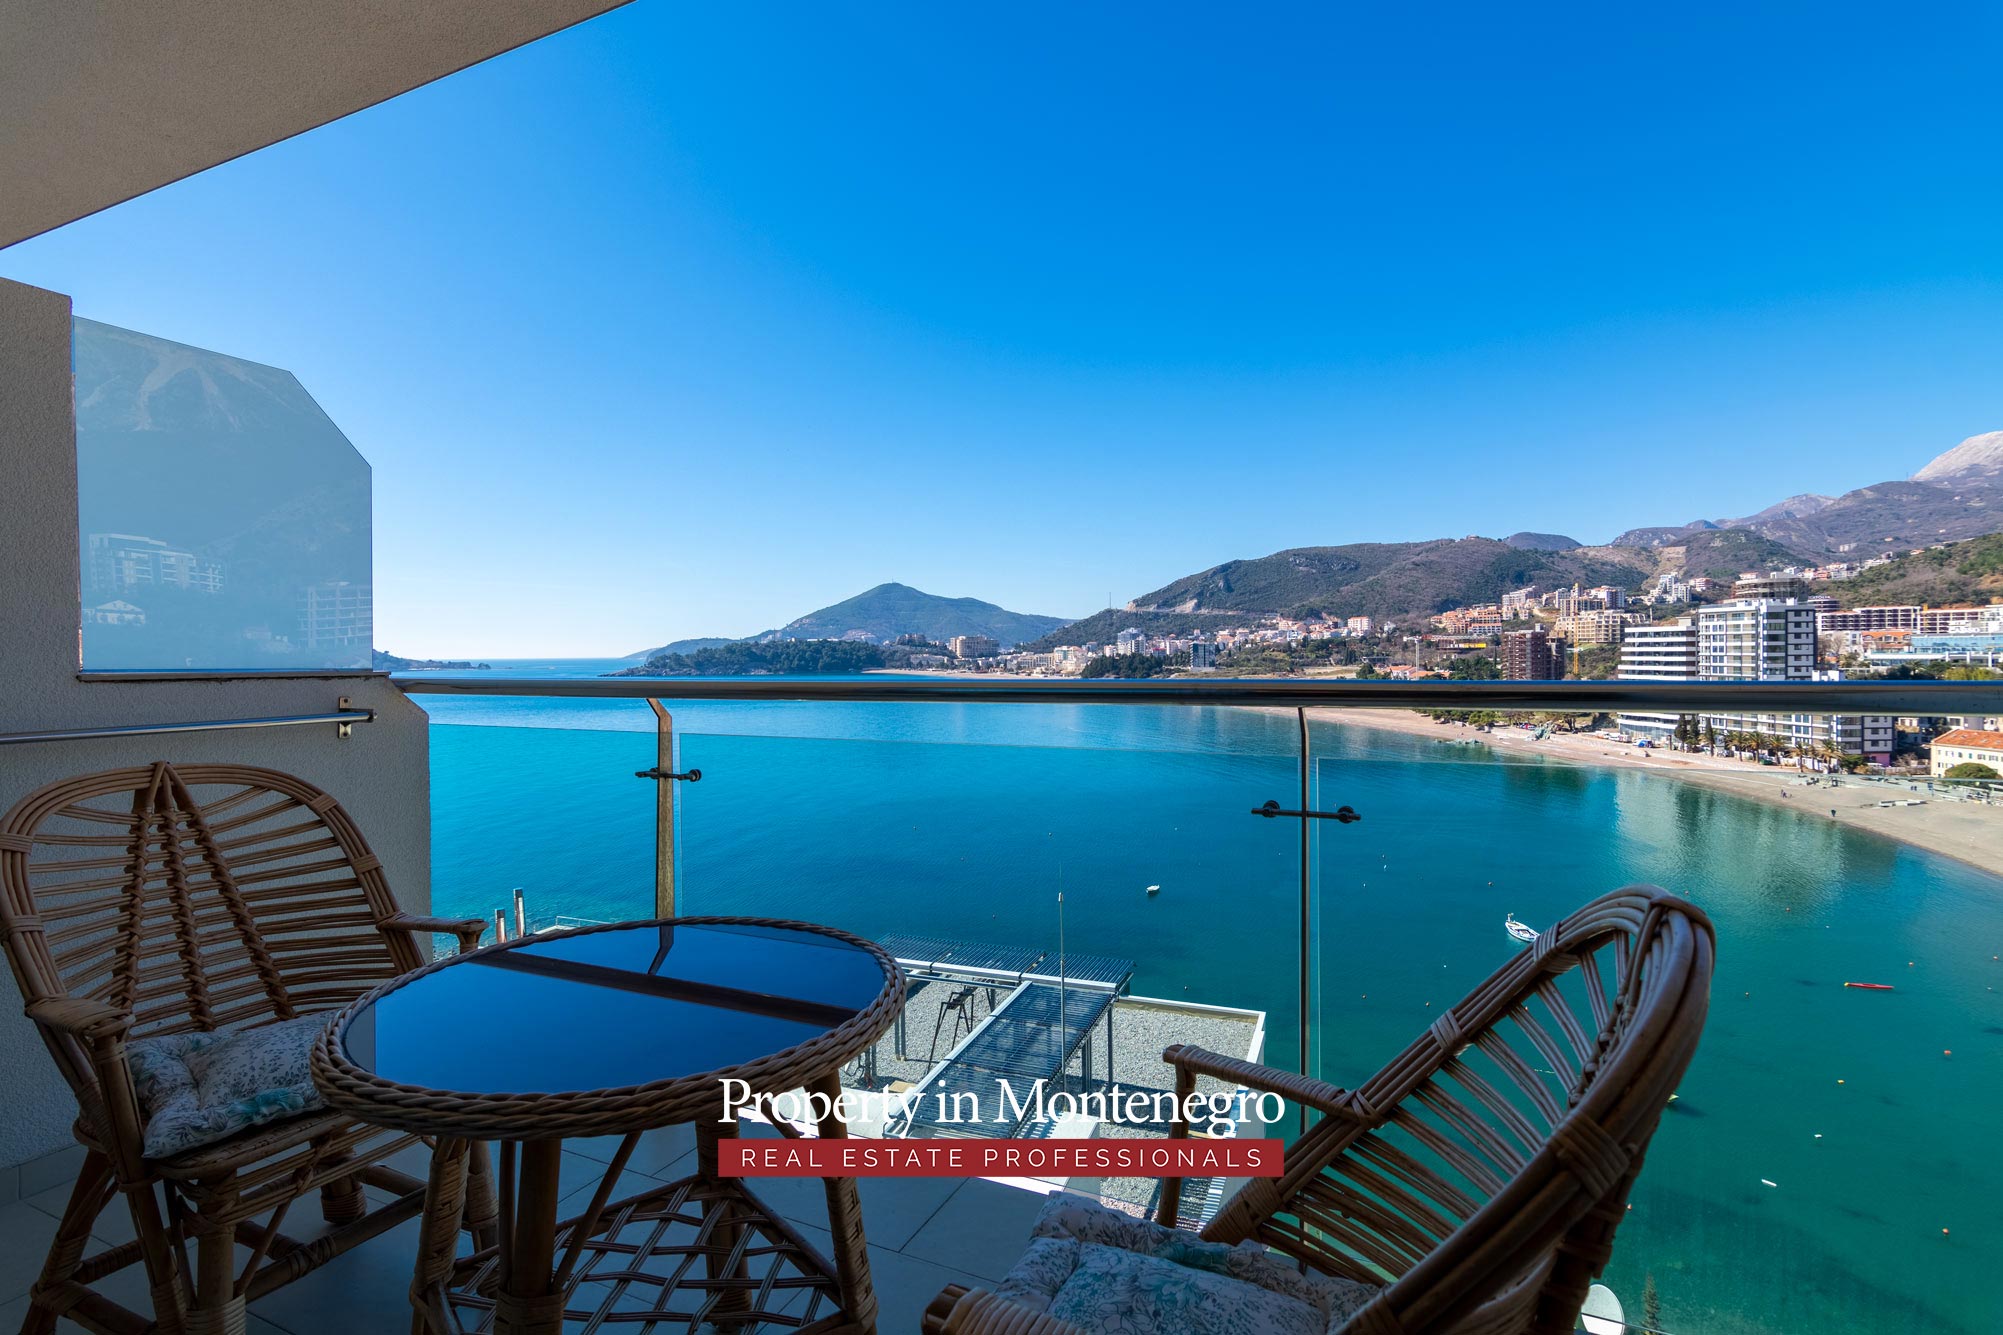 Furnished apartment for sale in Budva Riviera